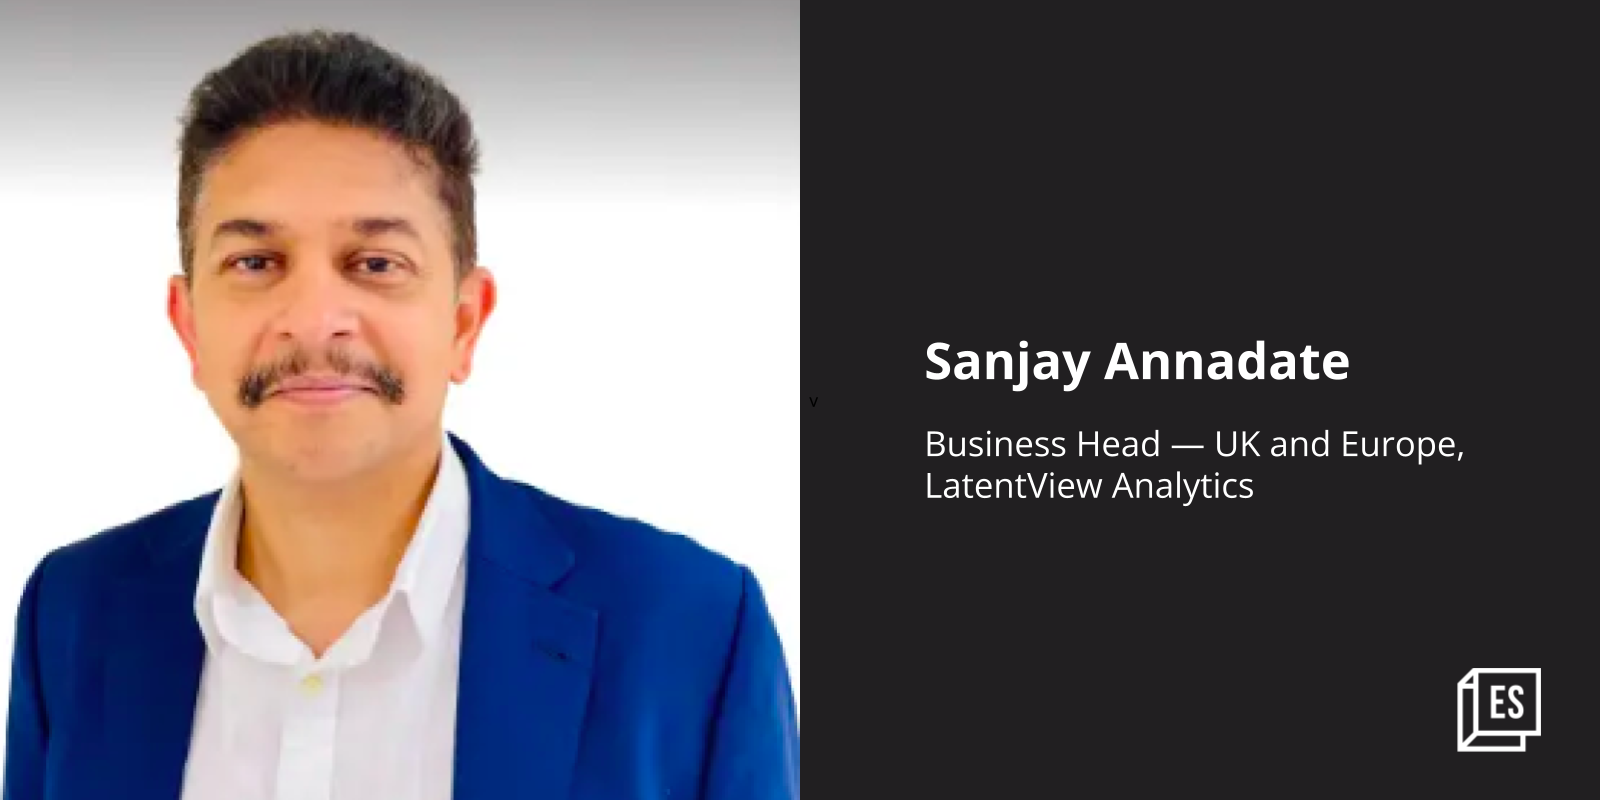 LatentView Analytics invests in the UK and Europe markets